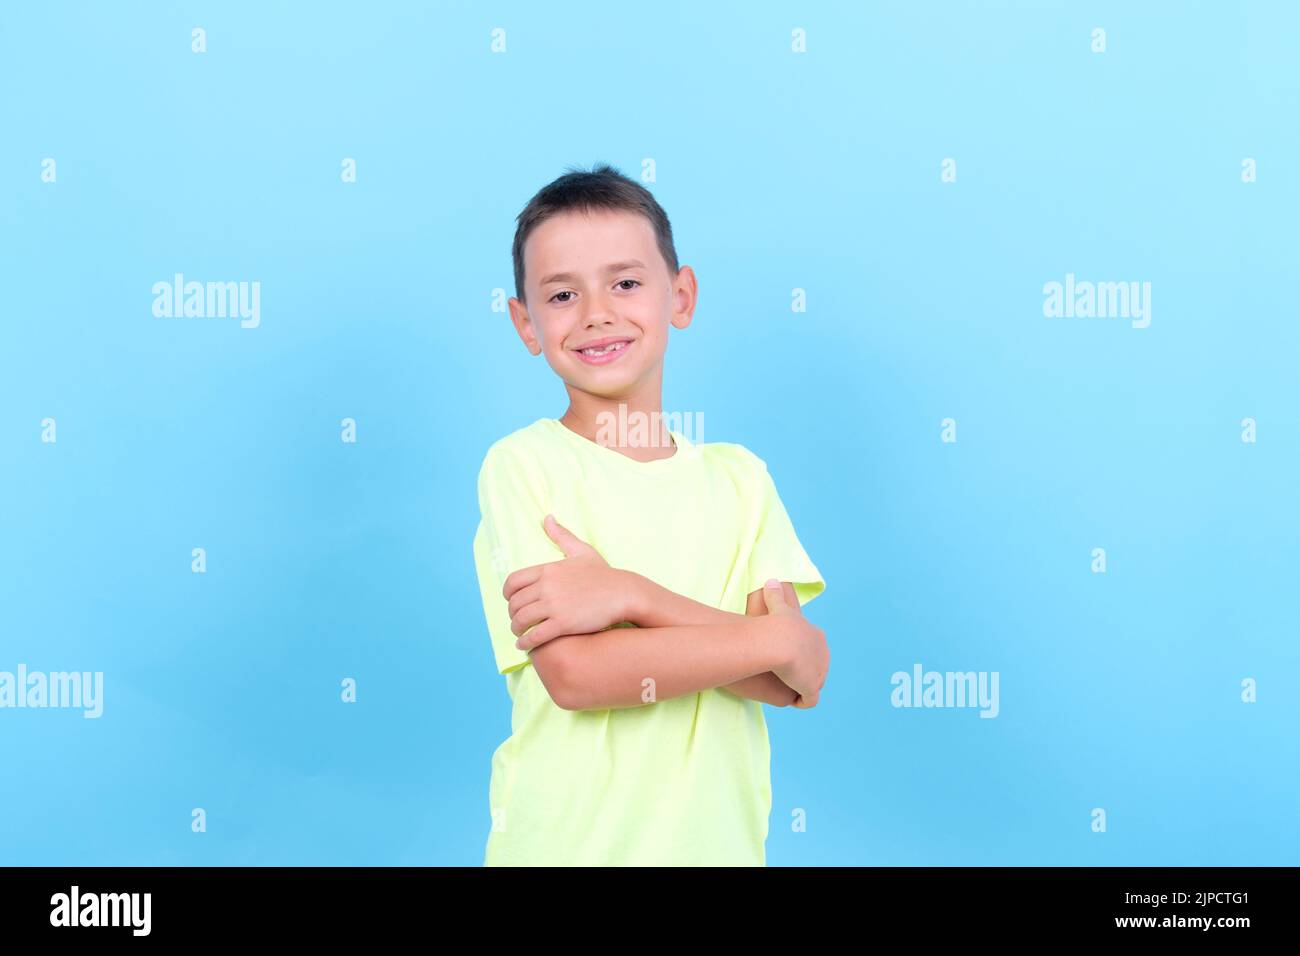 8-year-old boy with an impressed expression Stock Photo